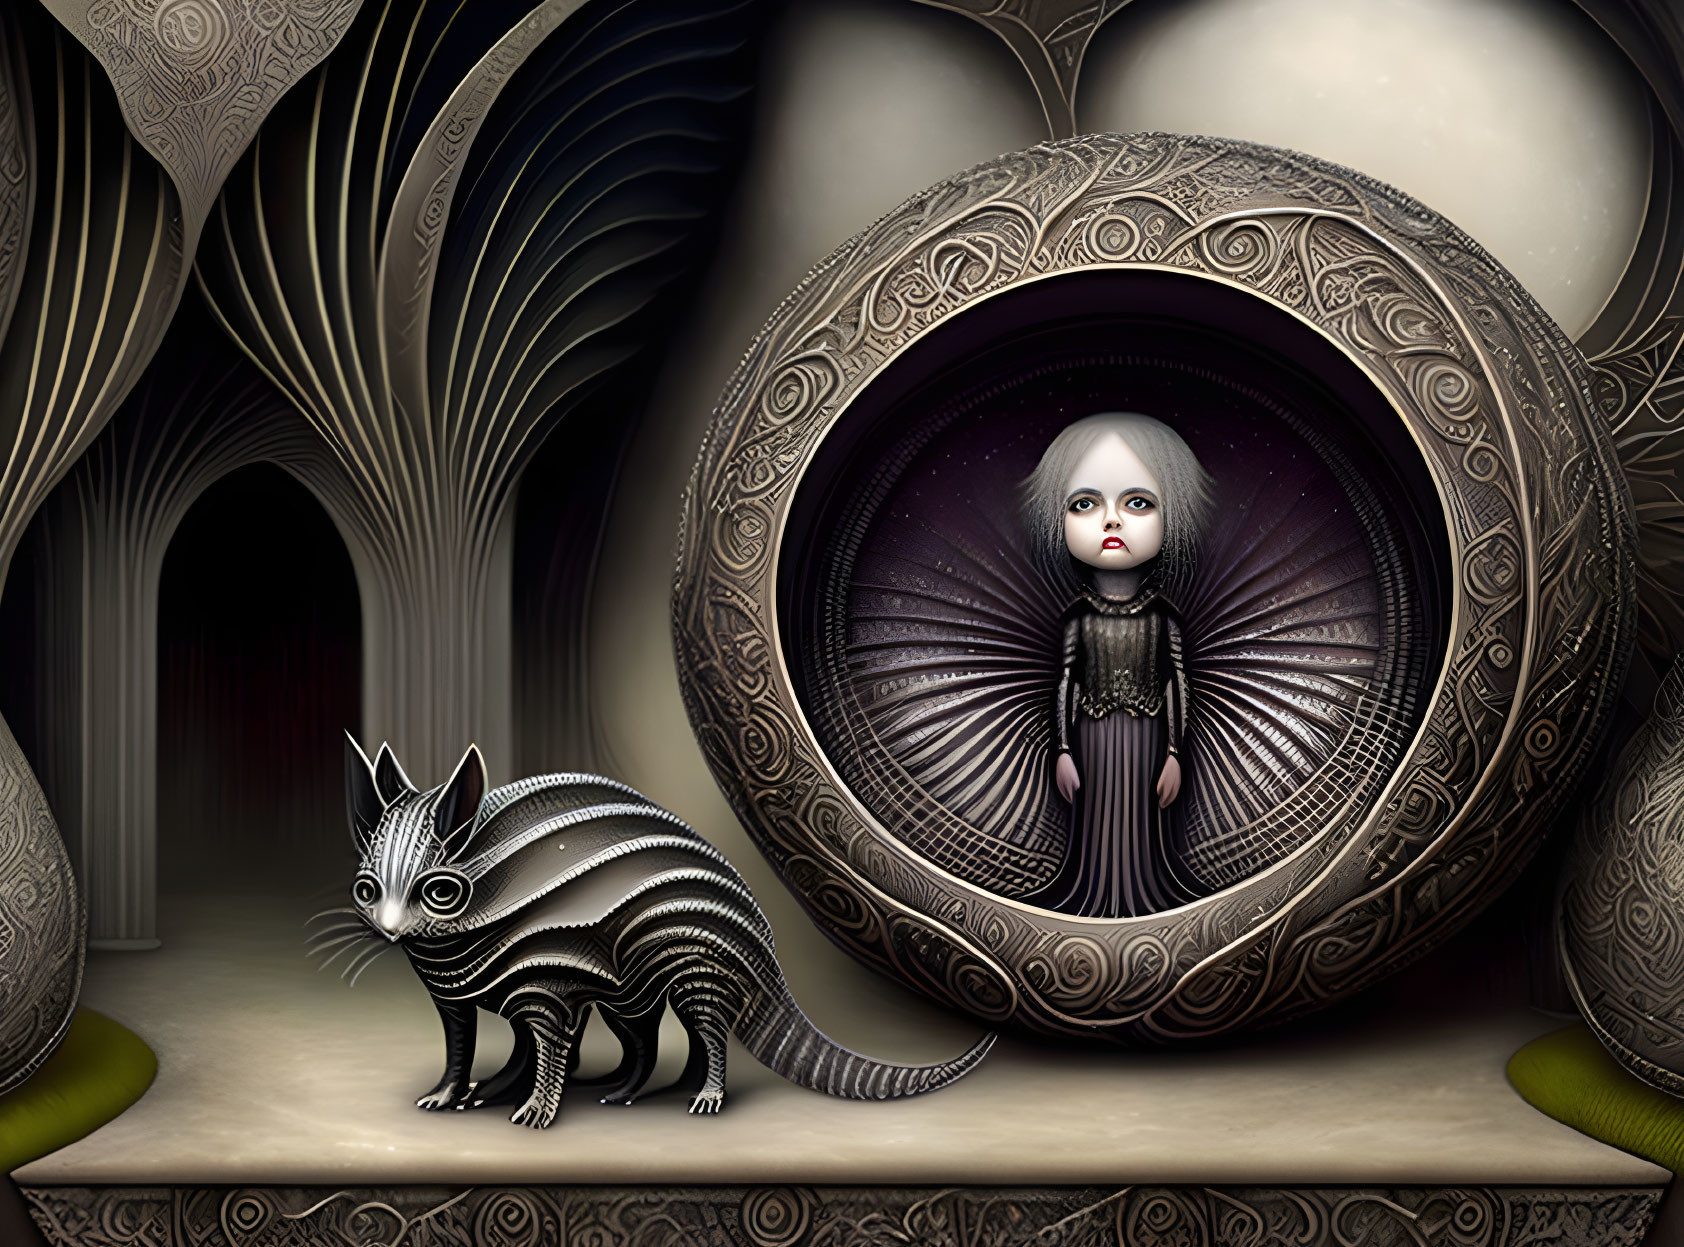 Surreal digital artwork: Striped cat and child in decorated orb with arches